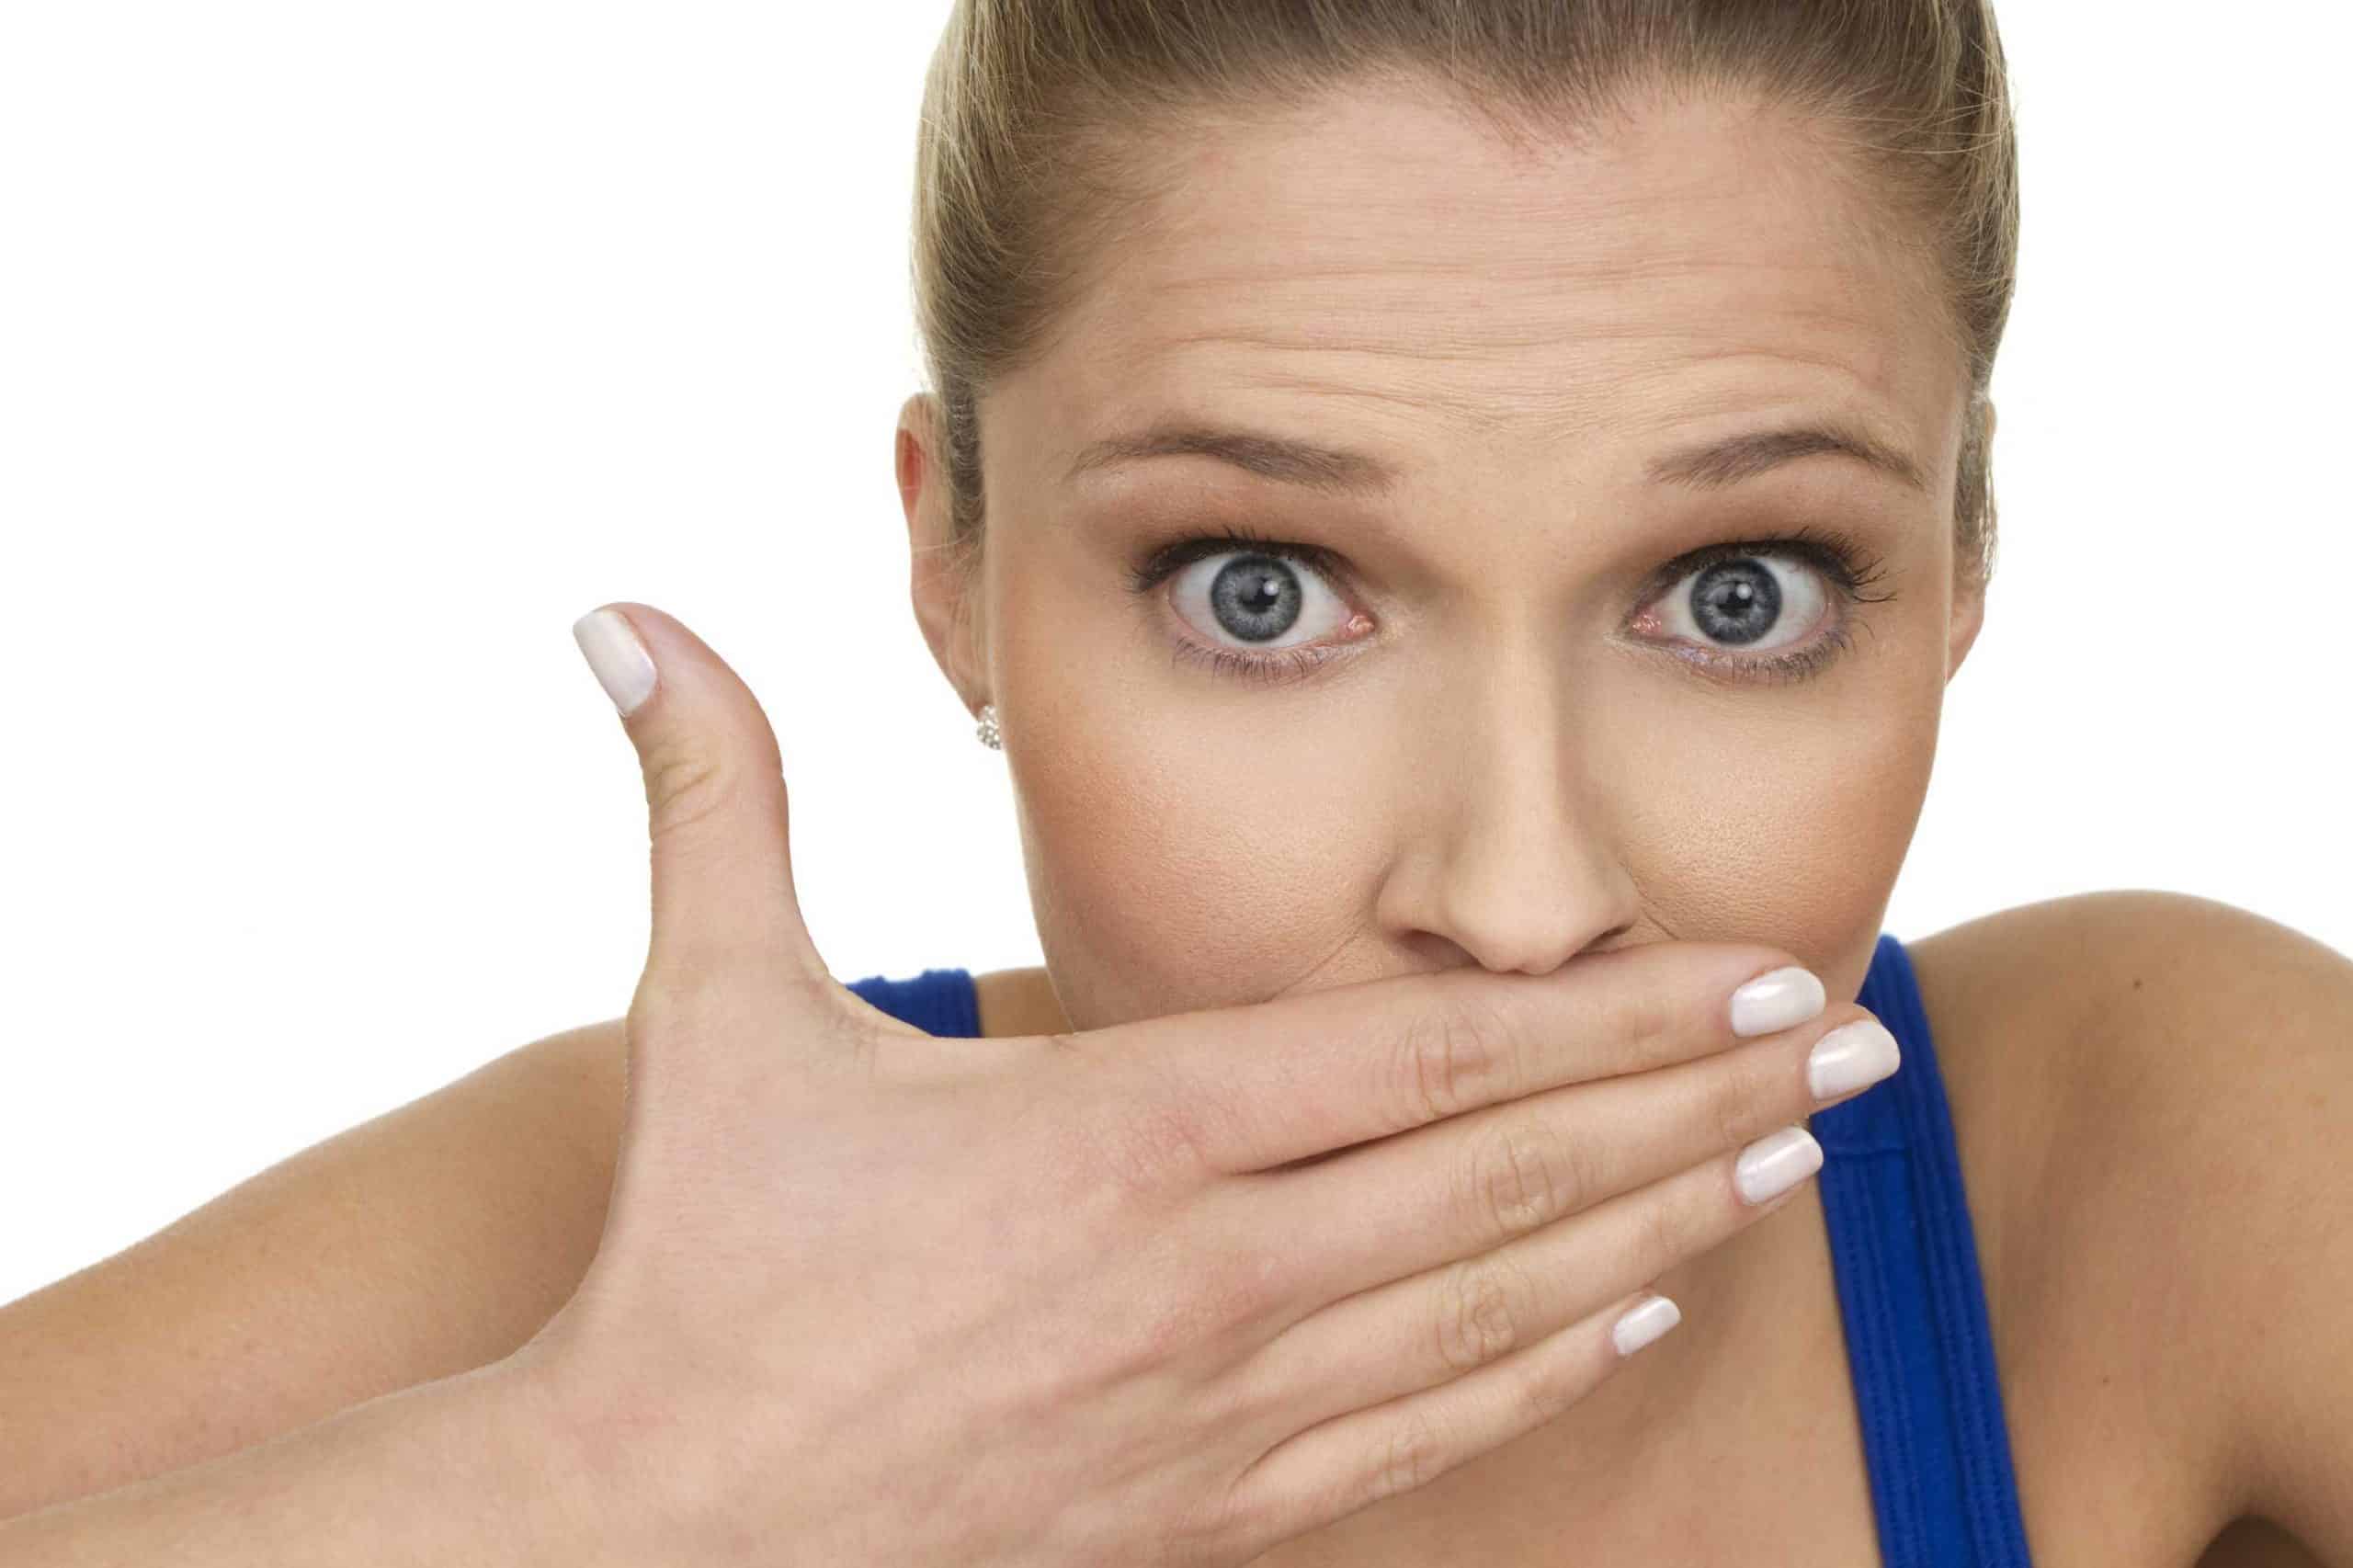 What Your Bad Breath Says About You